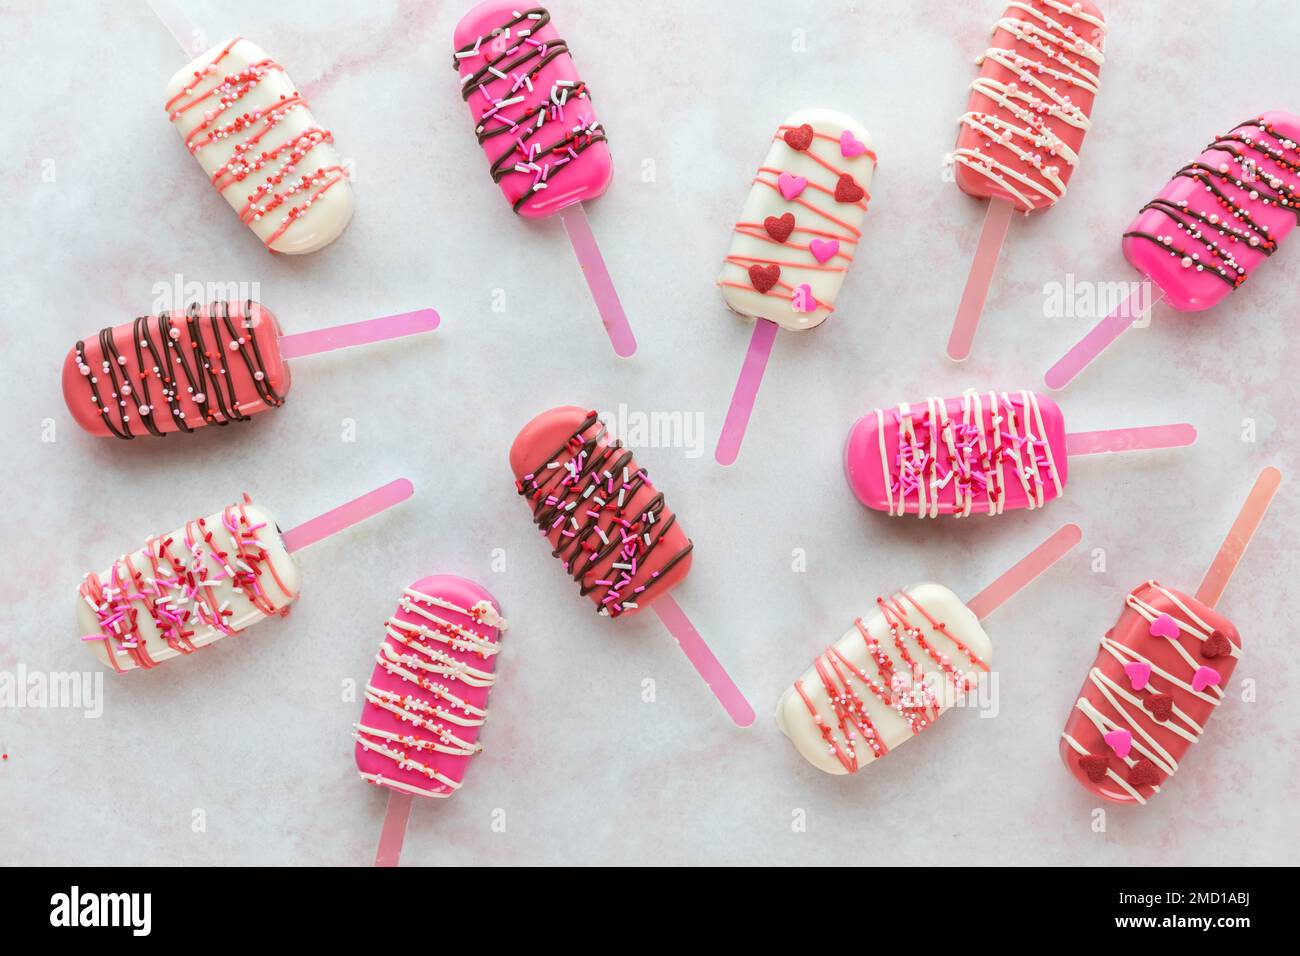 Several Valentine cakesicles scattered on a pink marble surface. Stock Photo